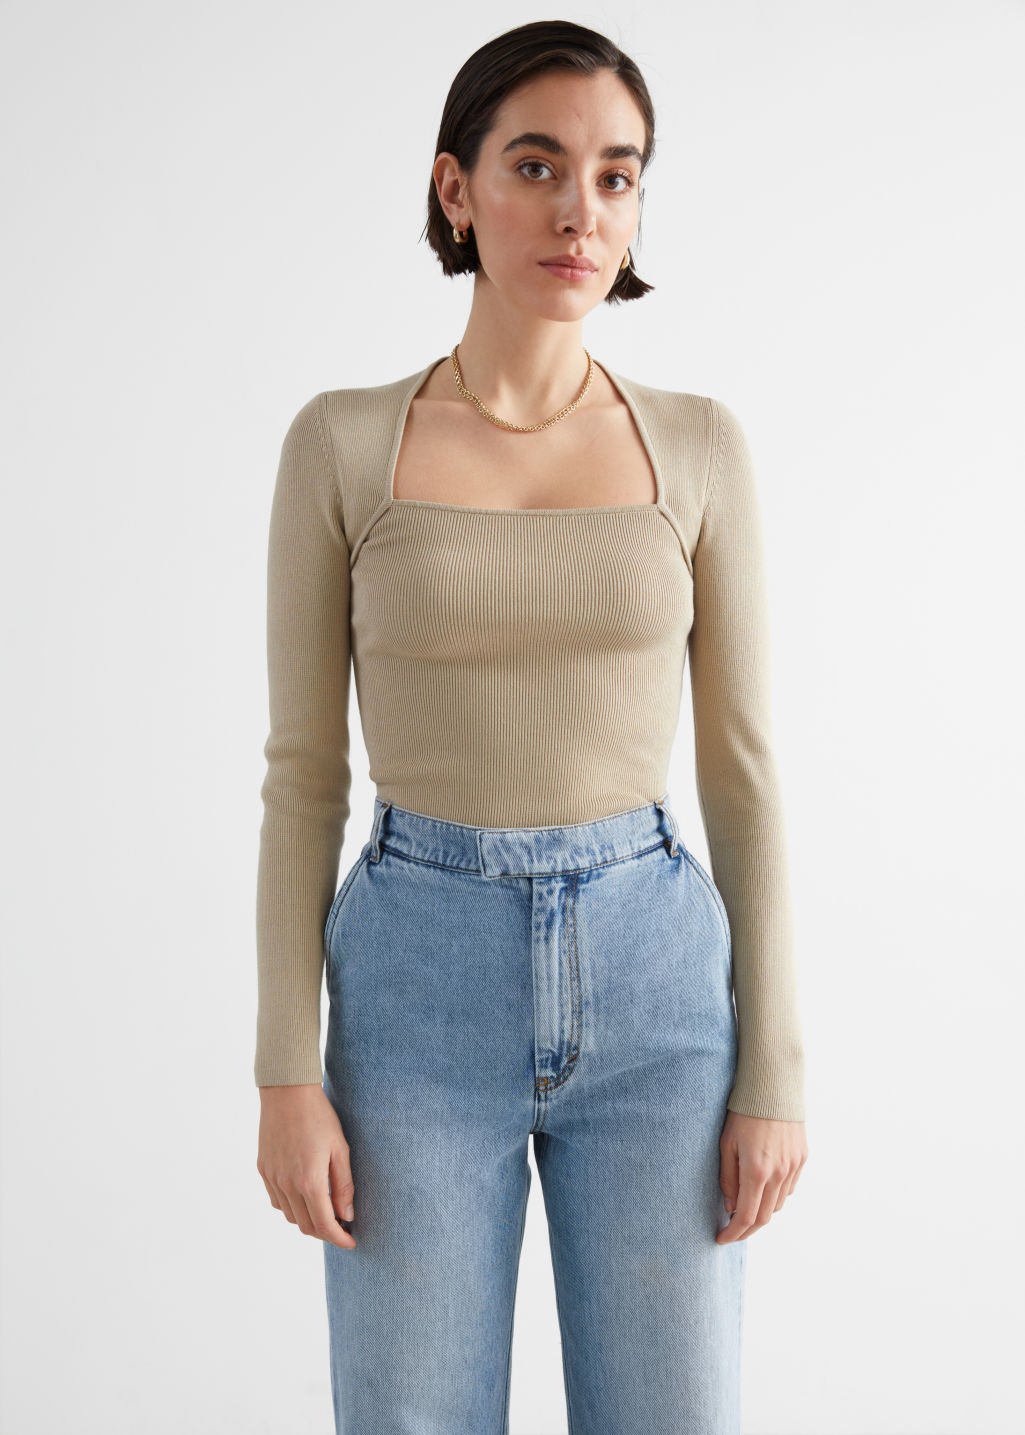 Long Sleeve Tubular Neck Sweater - Beige - Tops & T-shirts - & Other Stories